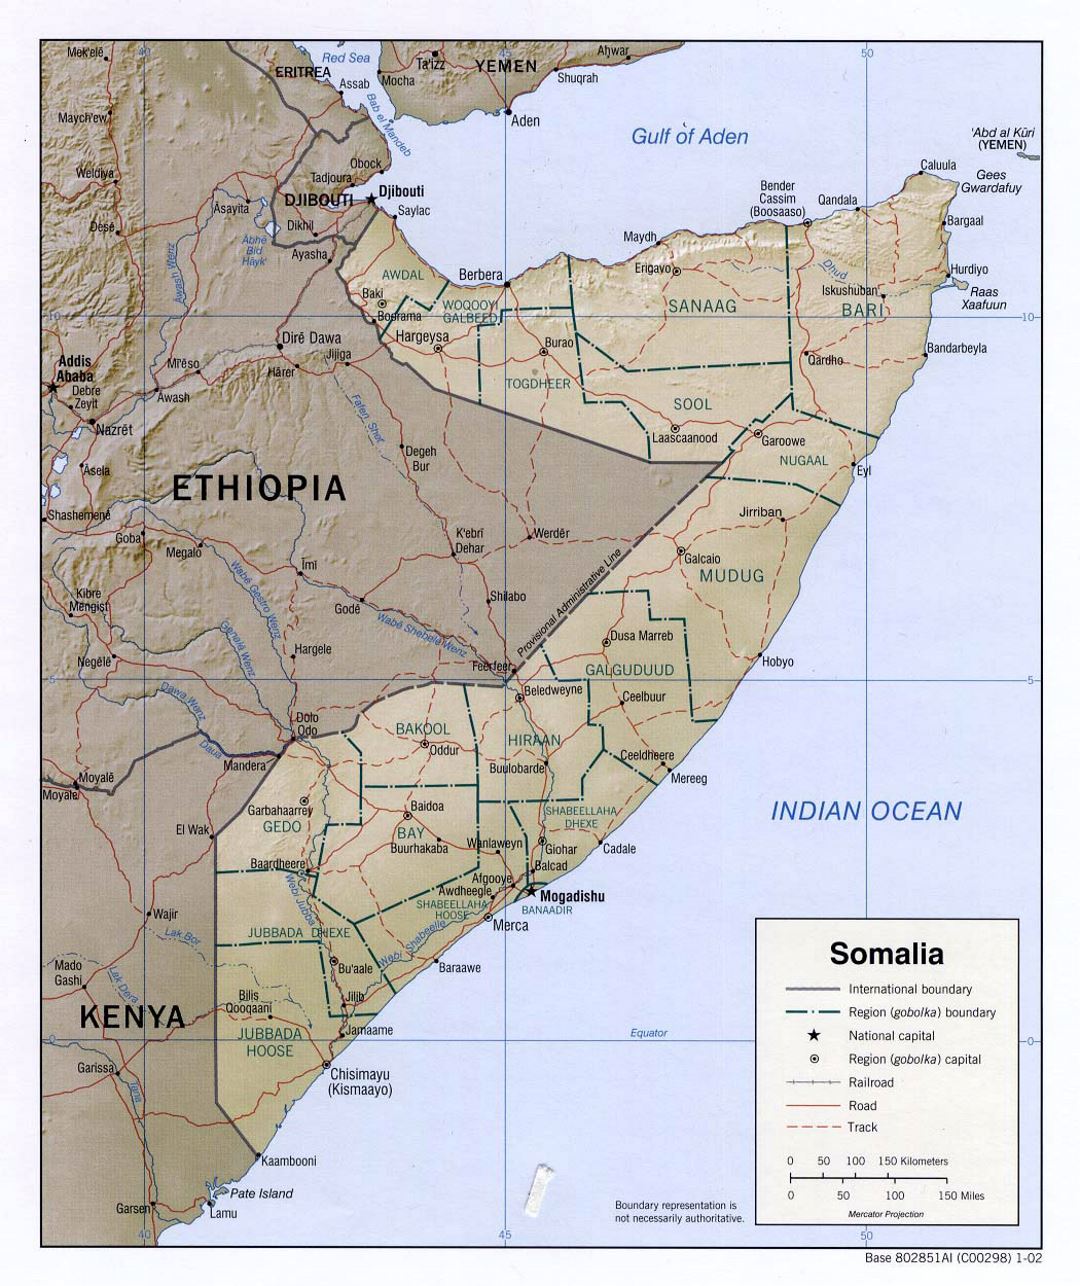 Detailed political and administrative map of Somalia with relief, roads, railroads and major cities - 2002